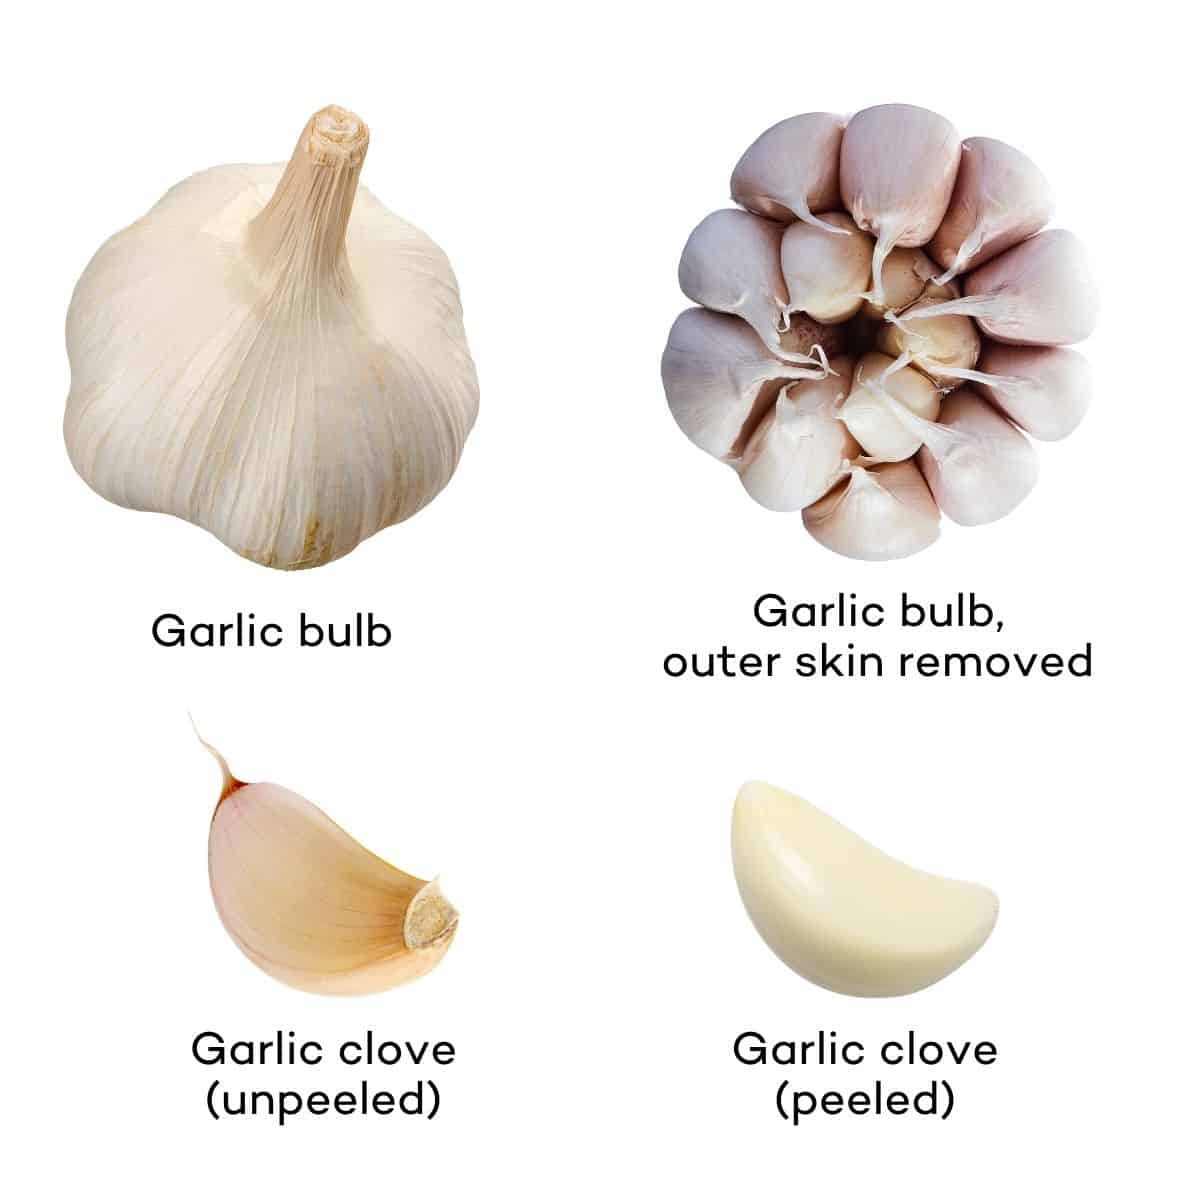 Pictures of garlic bulbs and cloves. 